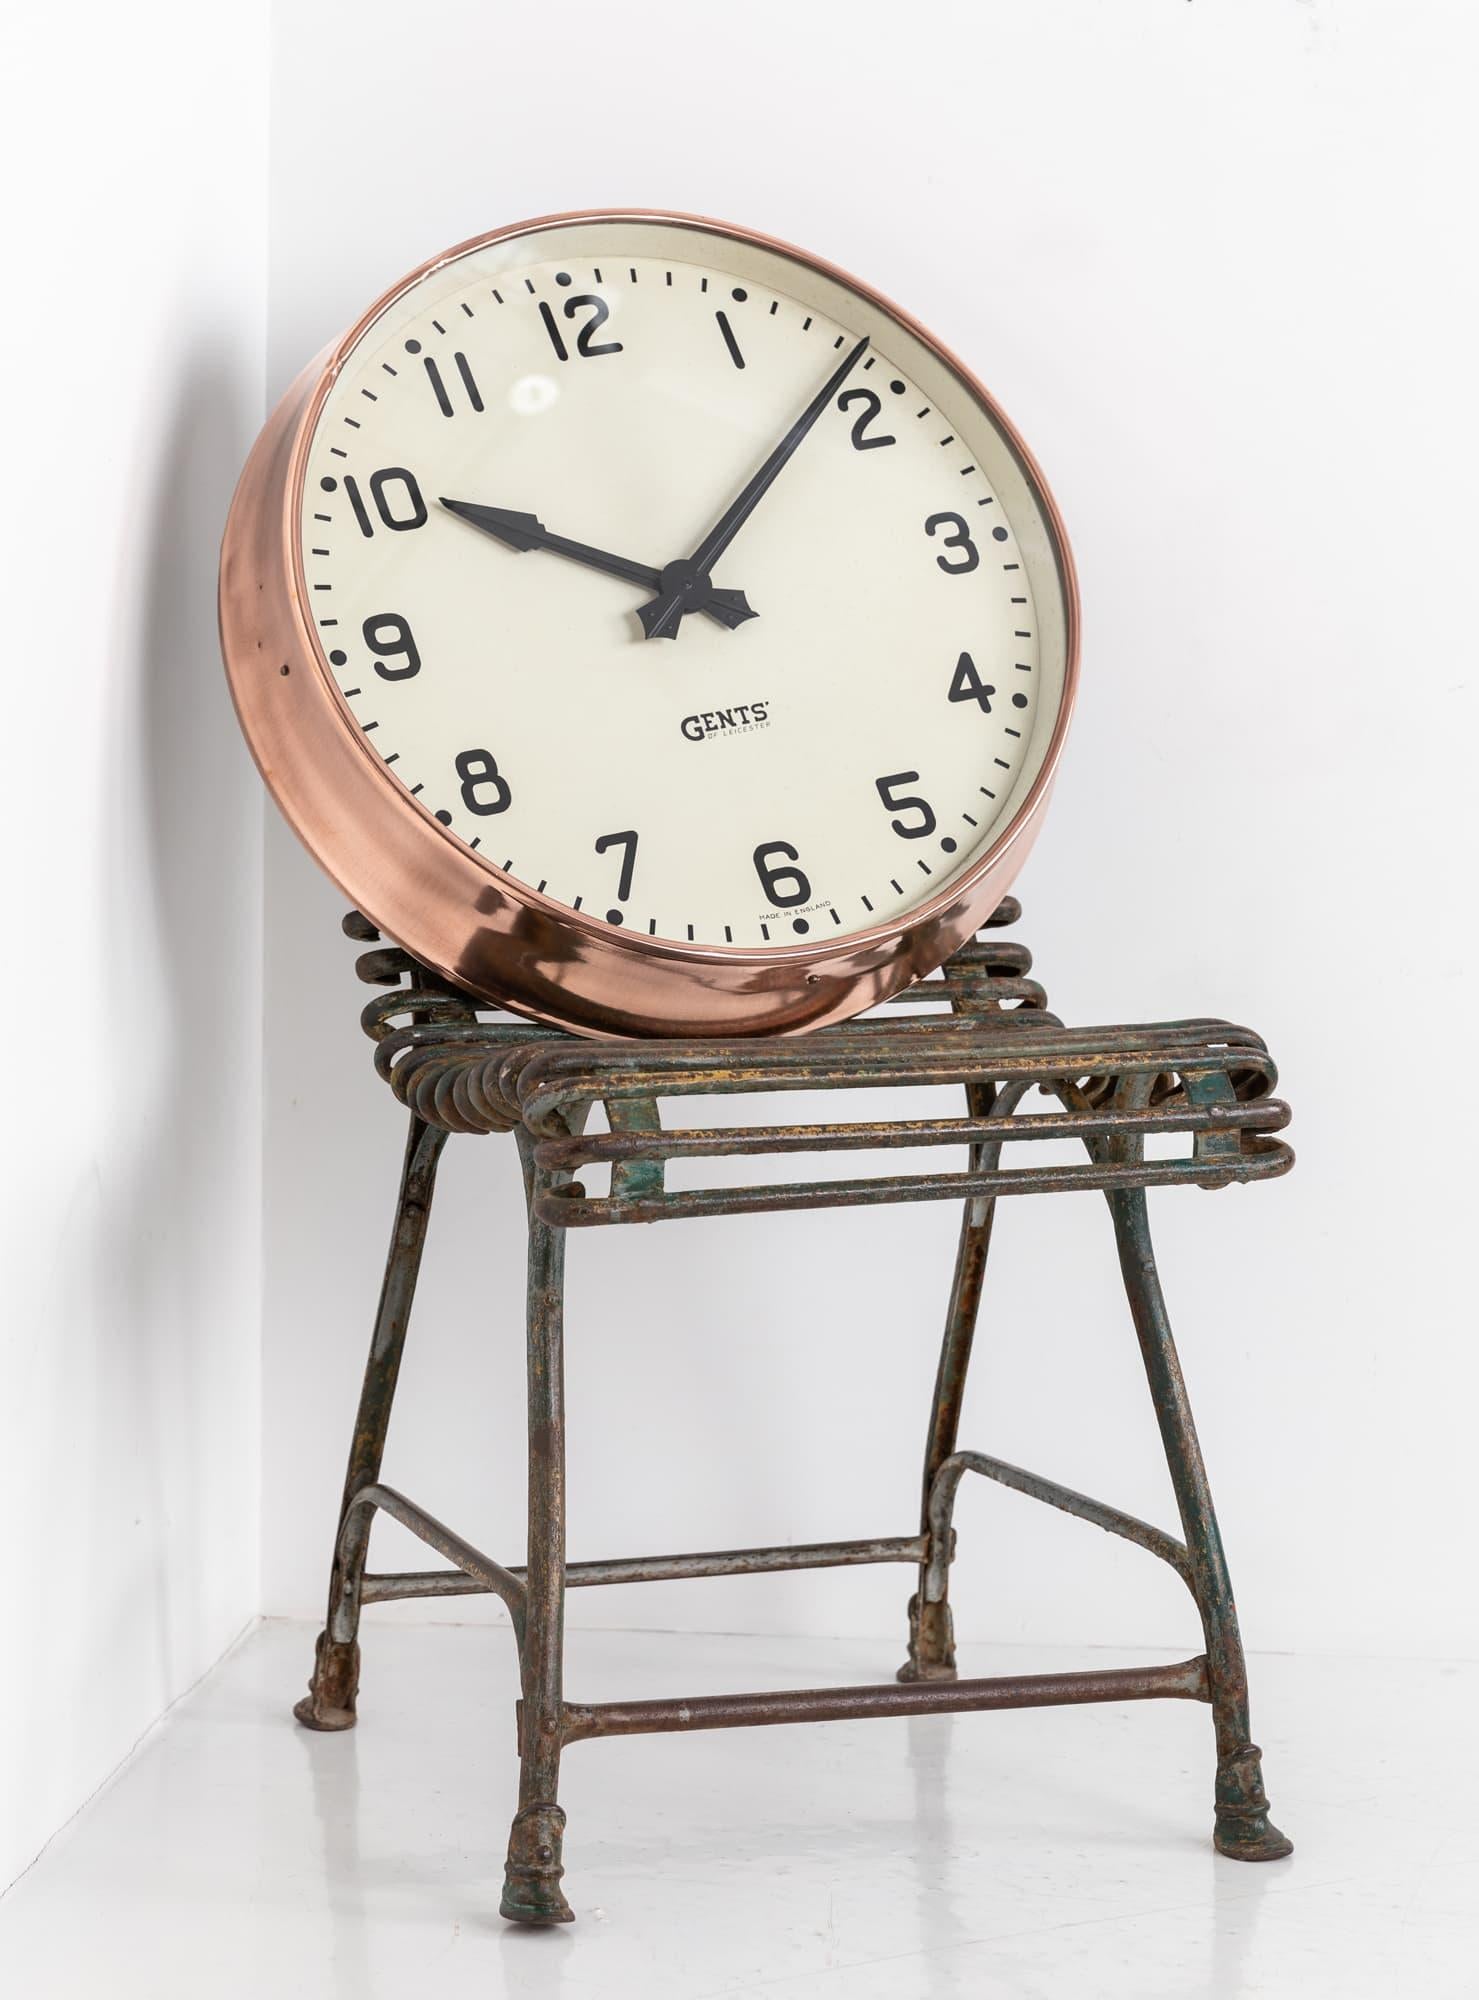 Beautiful example of a wall clock made in England by renowned electrical manufactures Gents of Leicester. c.1930

Casing has been stripped of paint to show the elegant copper beneath. Gents' arrowed hands running perfectly on the original 240v